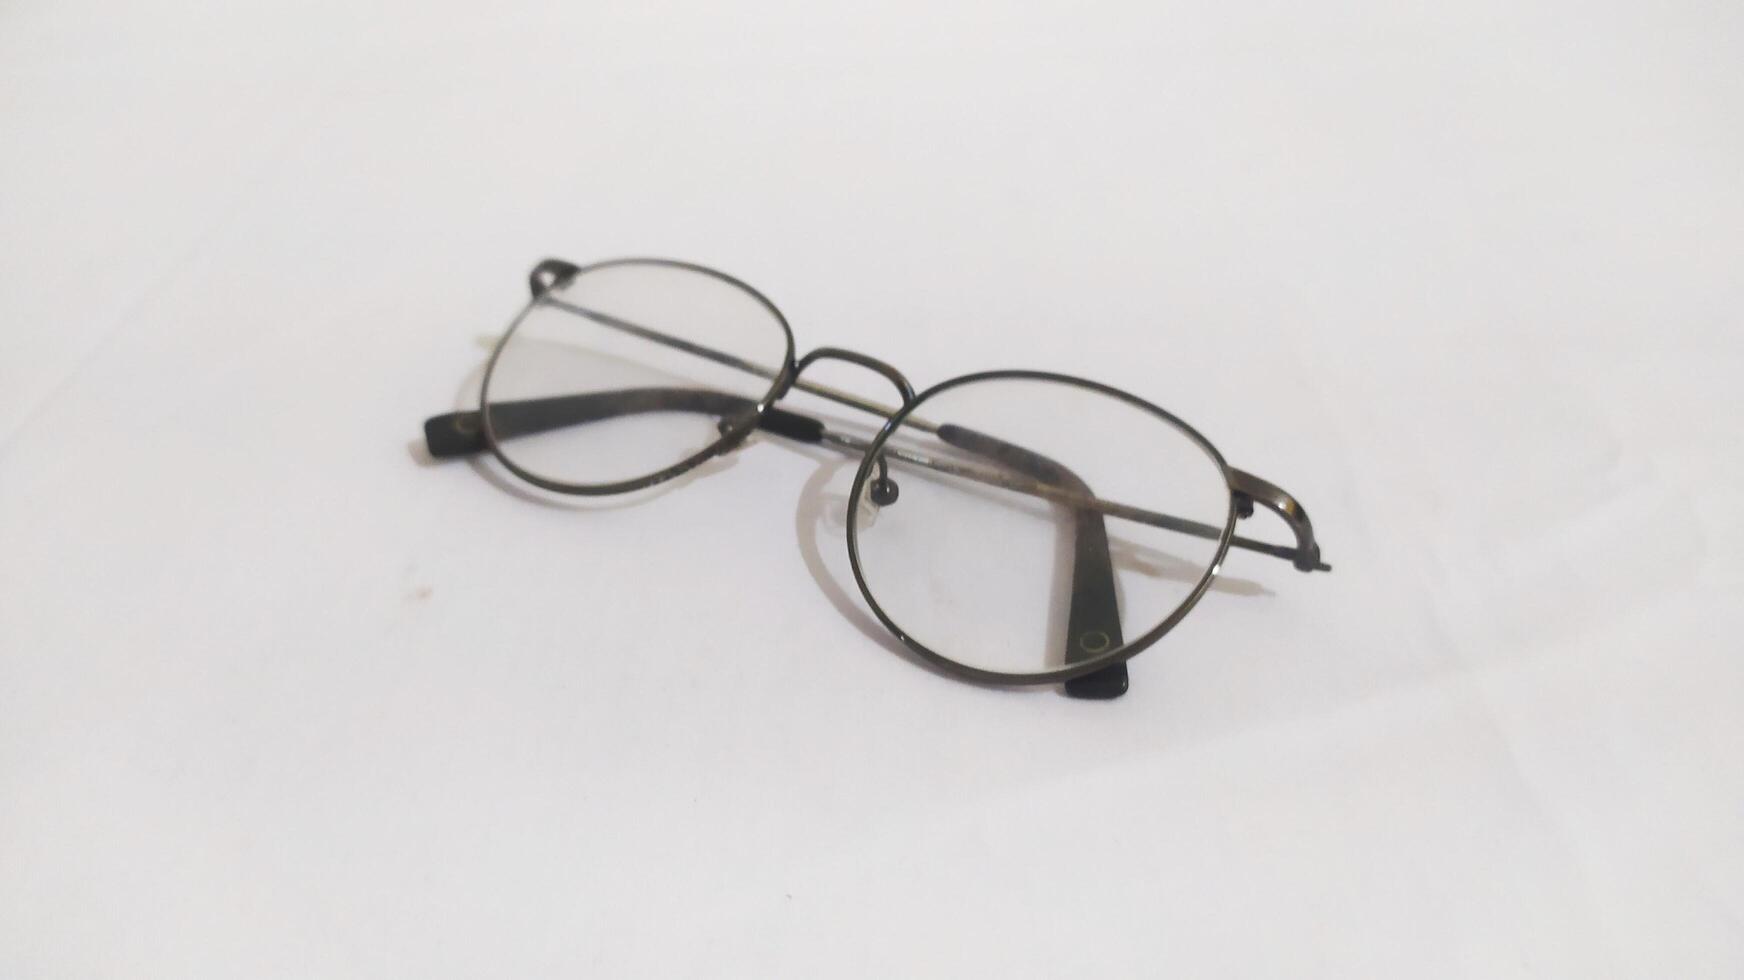 a pair of small glasses lying on the white surface photo